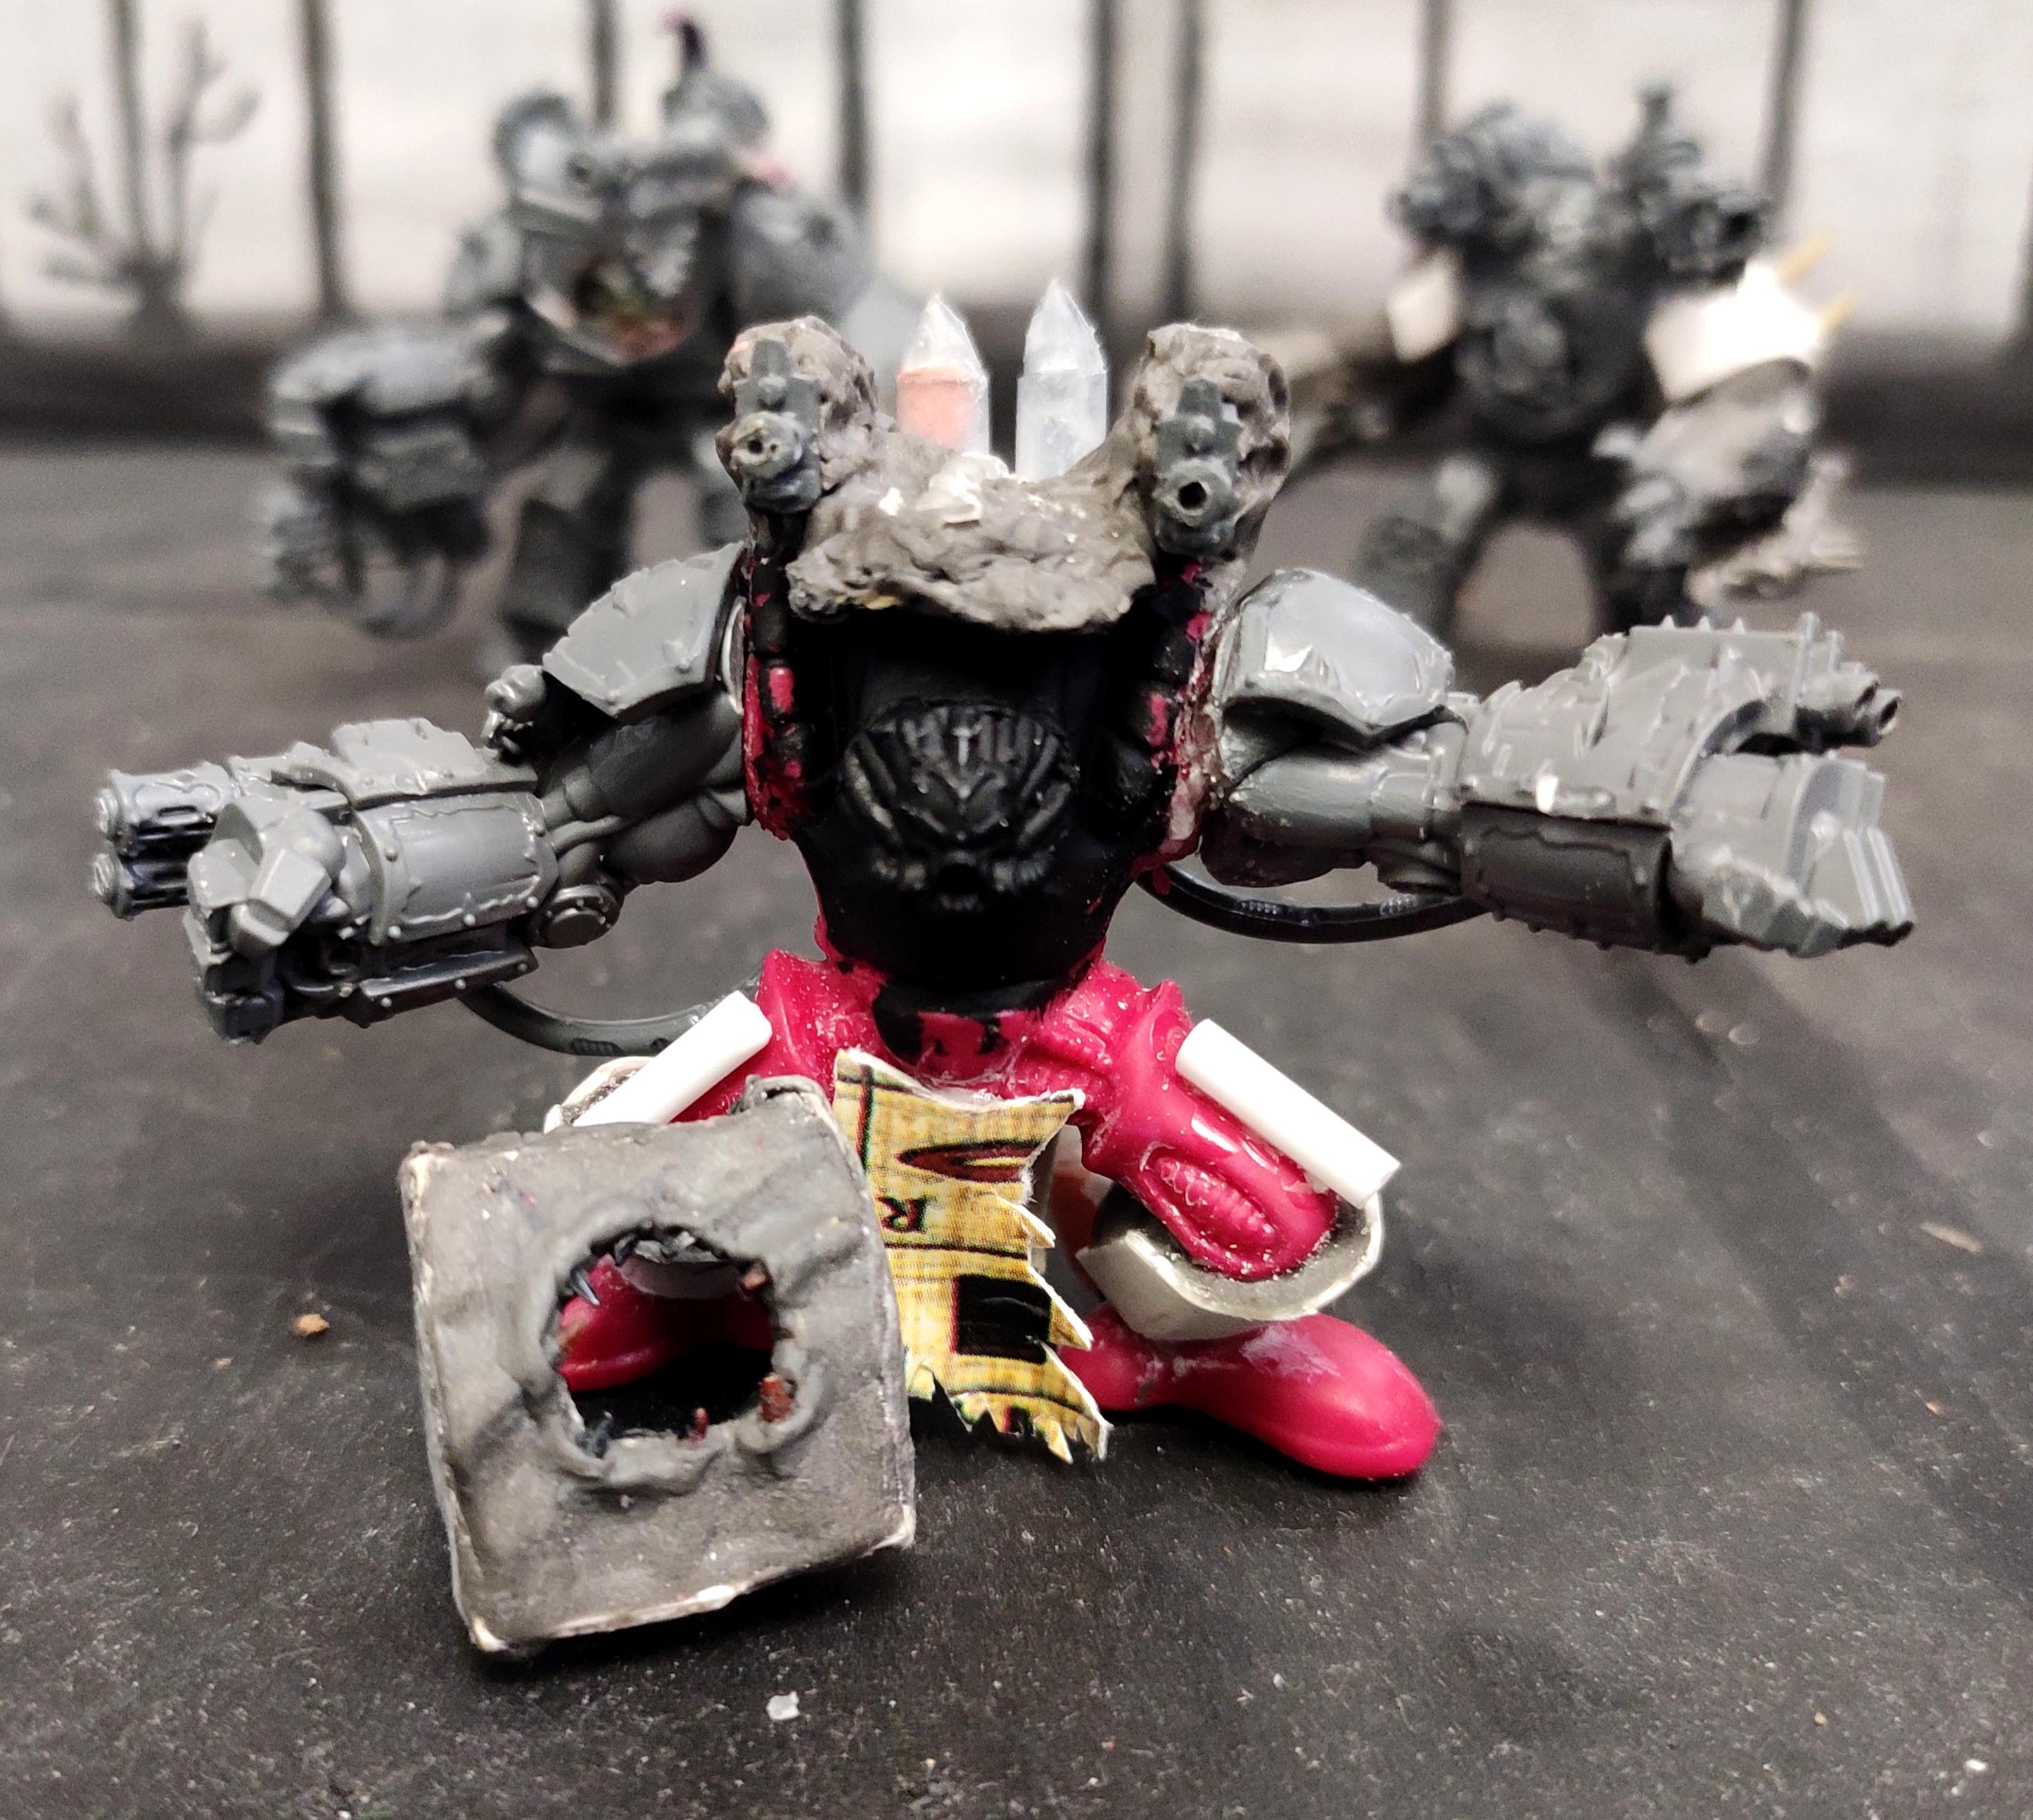 Ave Dominus Nox, Bolter, Chaos, Chaos Space Marines, Conversion, Heresy, Heretic Astartes, Infantry, Kitbash, Night Lords, Obliterators, Putty, Scratch Build, Sculpting, Shadowspear, Tehnolog, Traitor Legions, Warhammer 40,000, Work In Progress